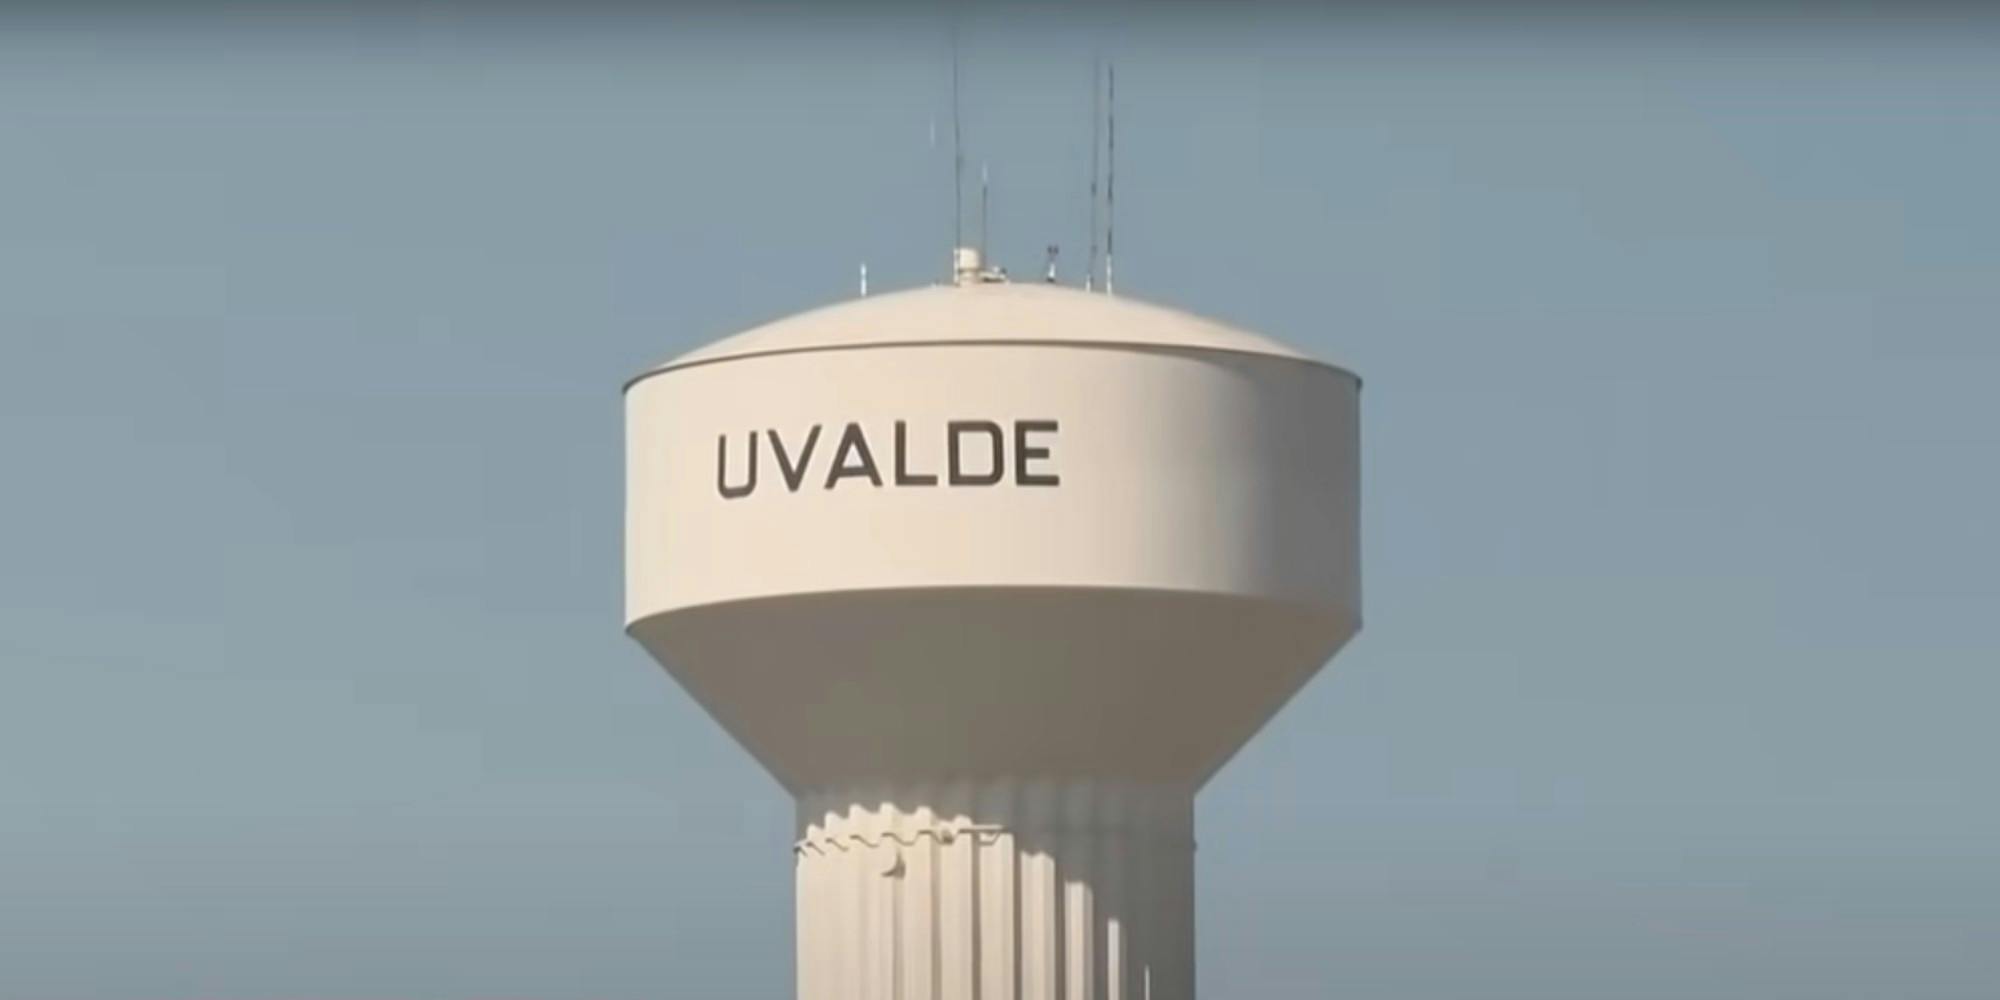 A Water town in Uvalde, Texas